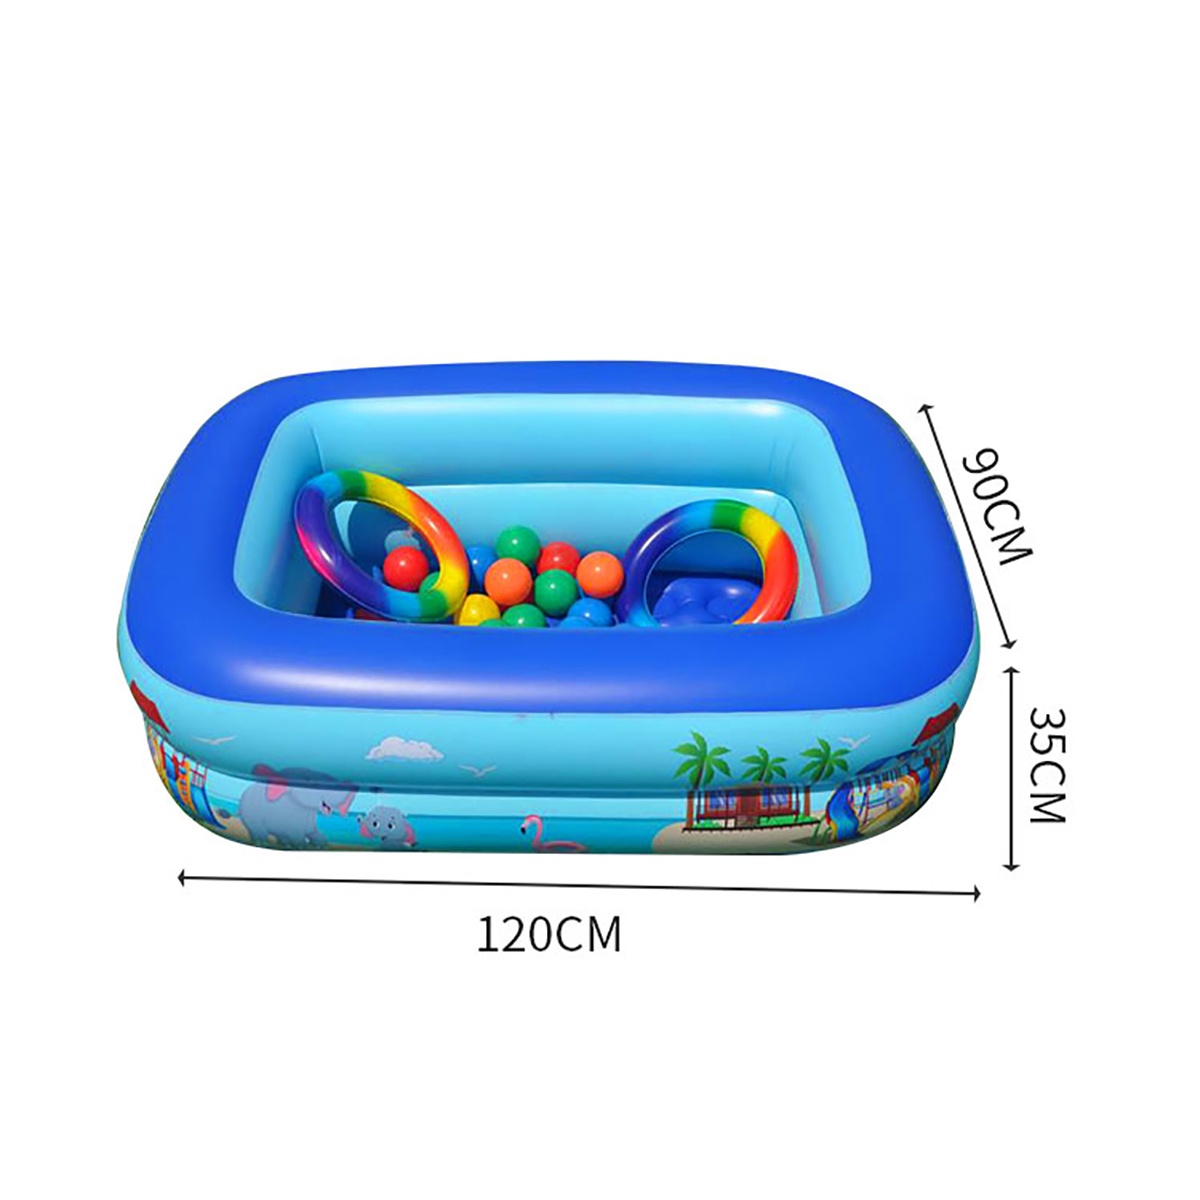 Thickened-PVC-Inflatable-Swimming-Pool-Childrens-Swimming-Pool-Bath-Tub-Outdoor-Indoor-Play-Pool-Chi-1856509-10